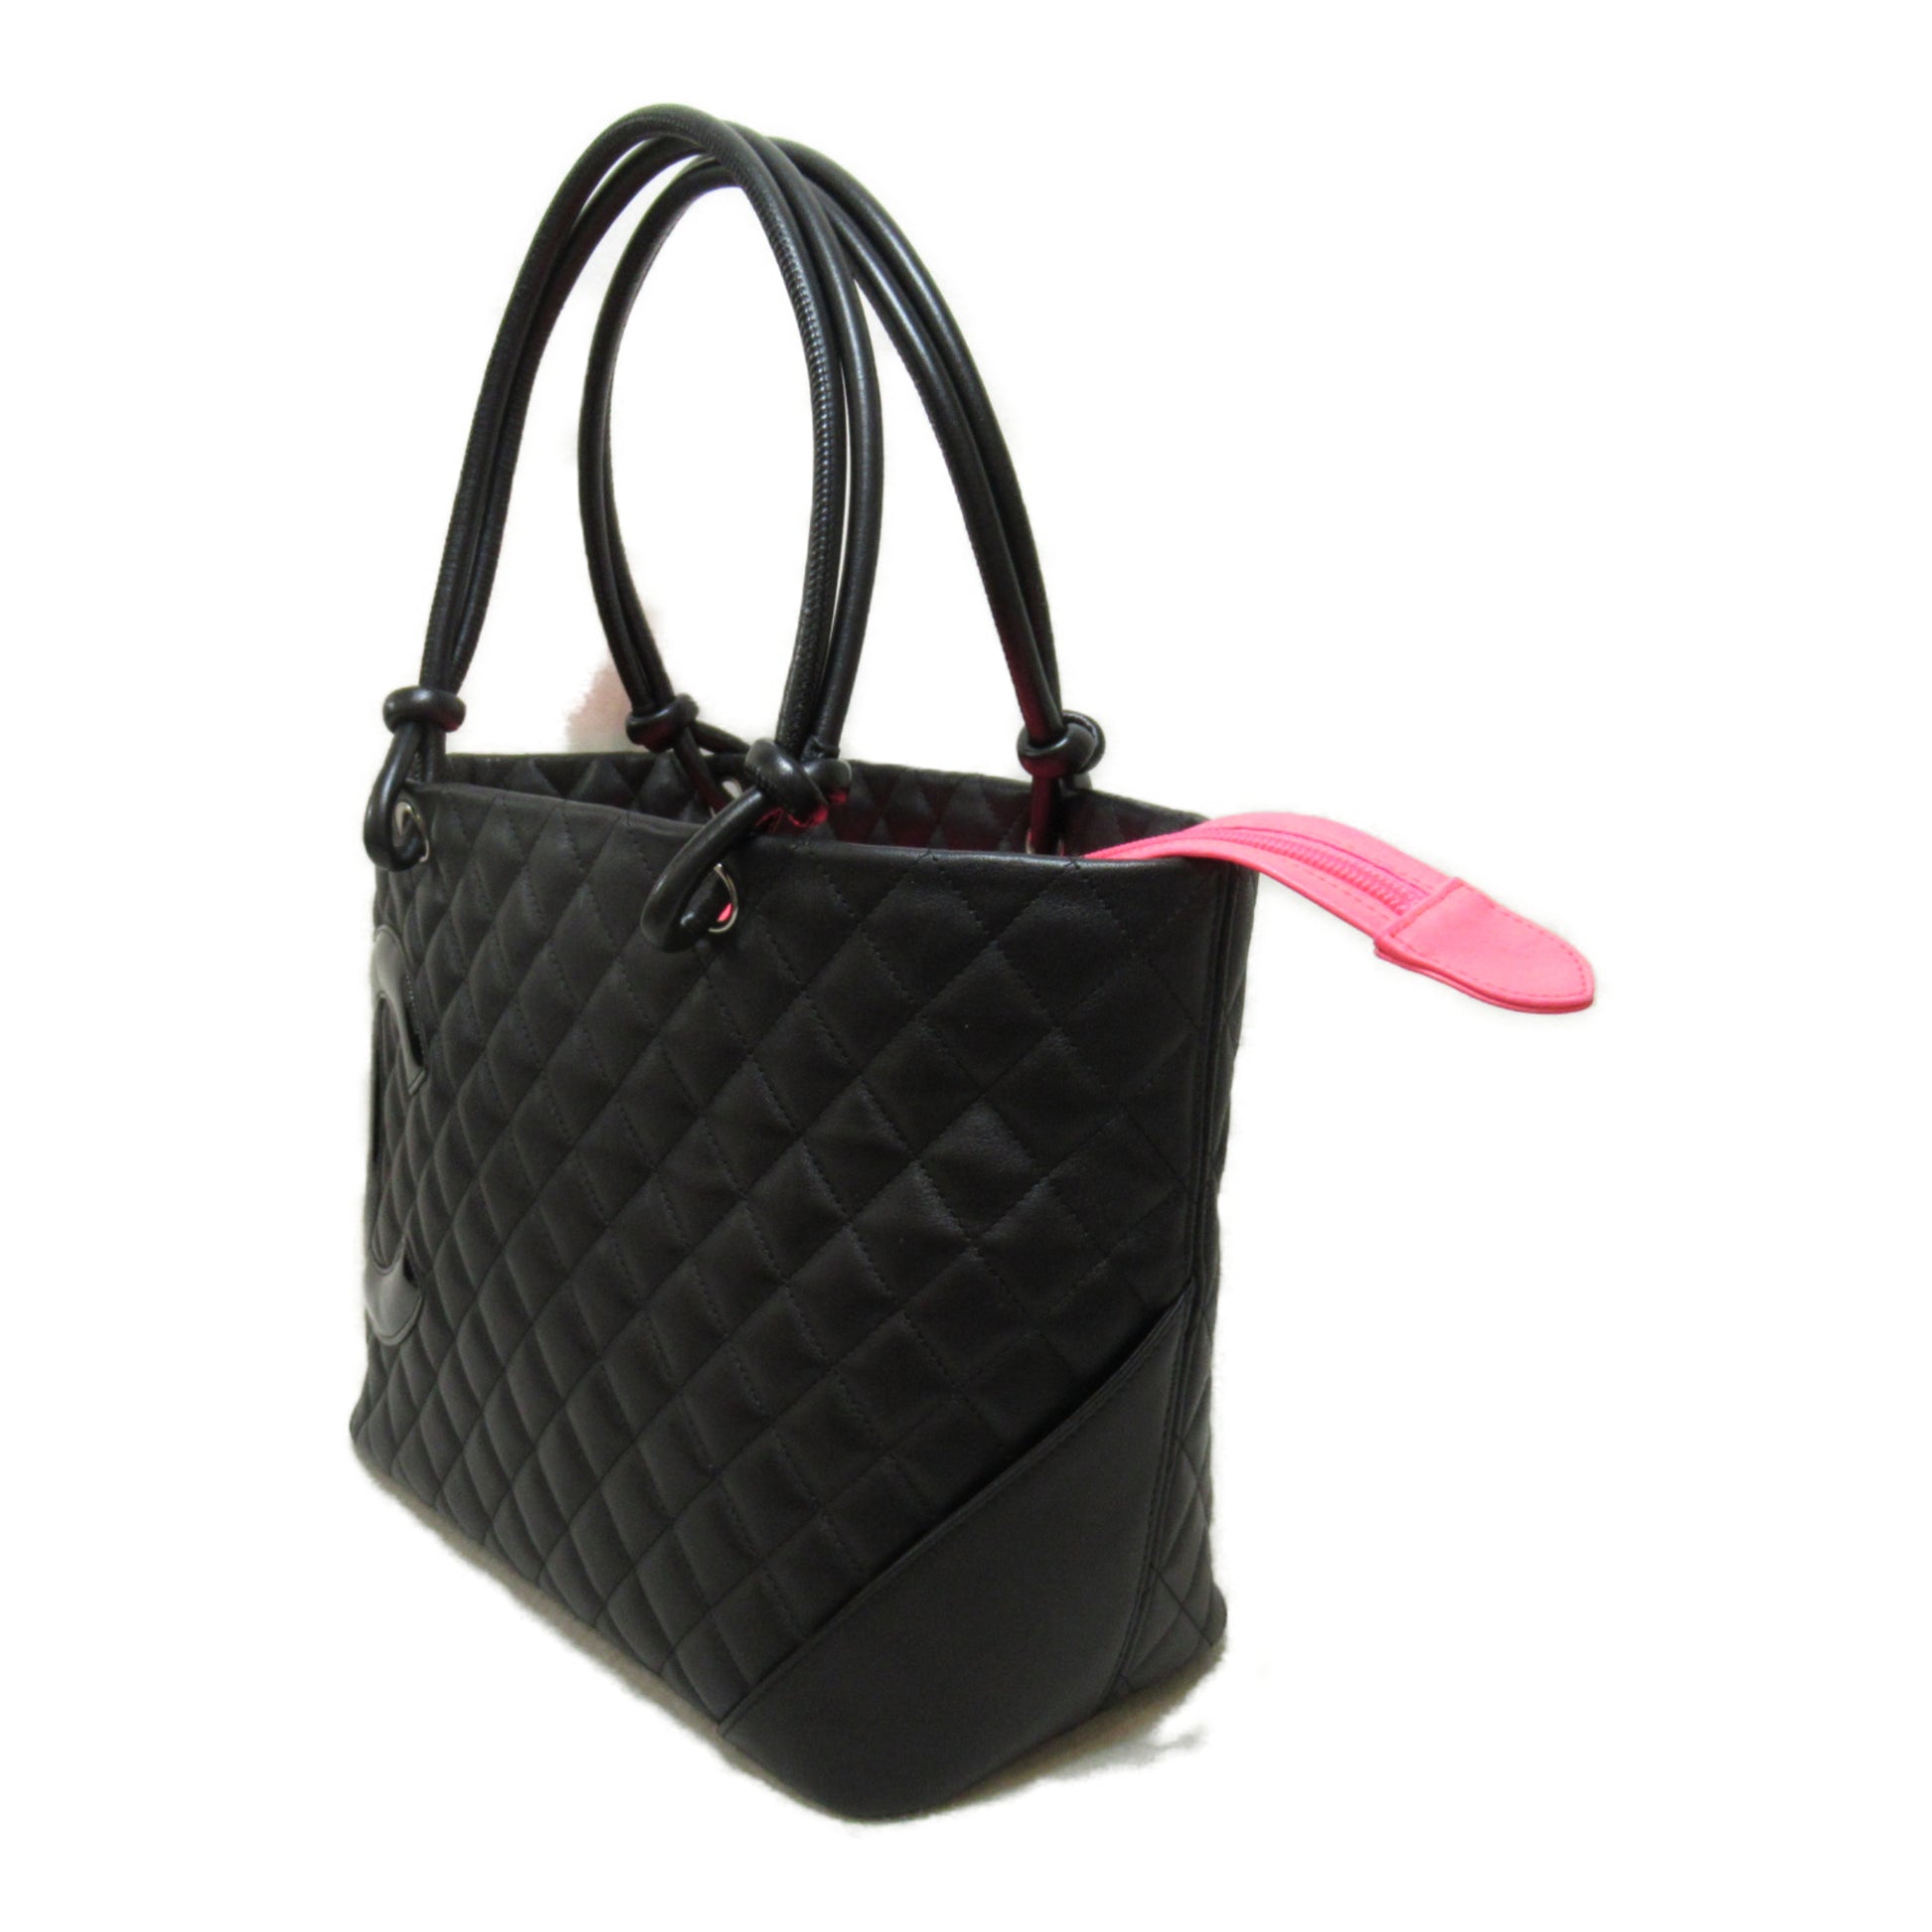 CHANEL Cambon Line Large Tote Bag Black leather A25169